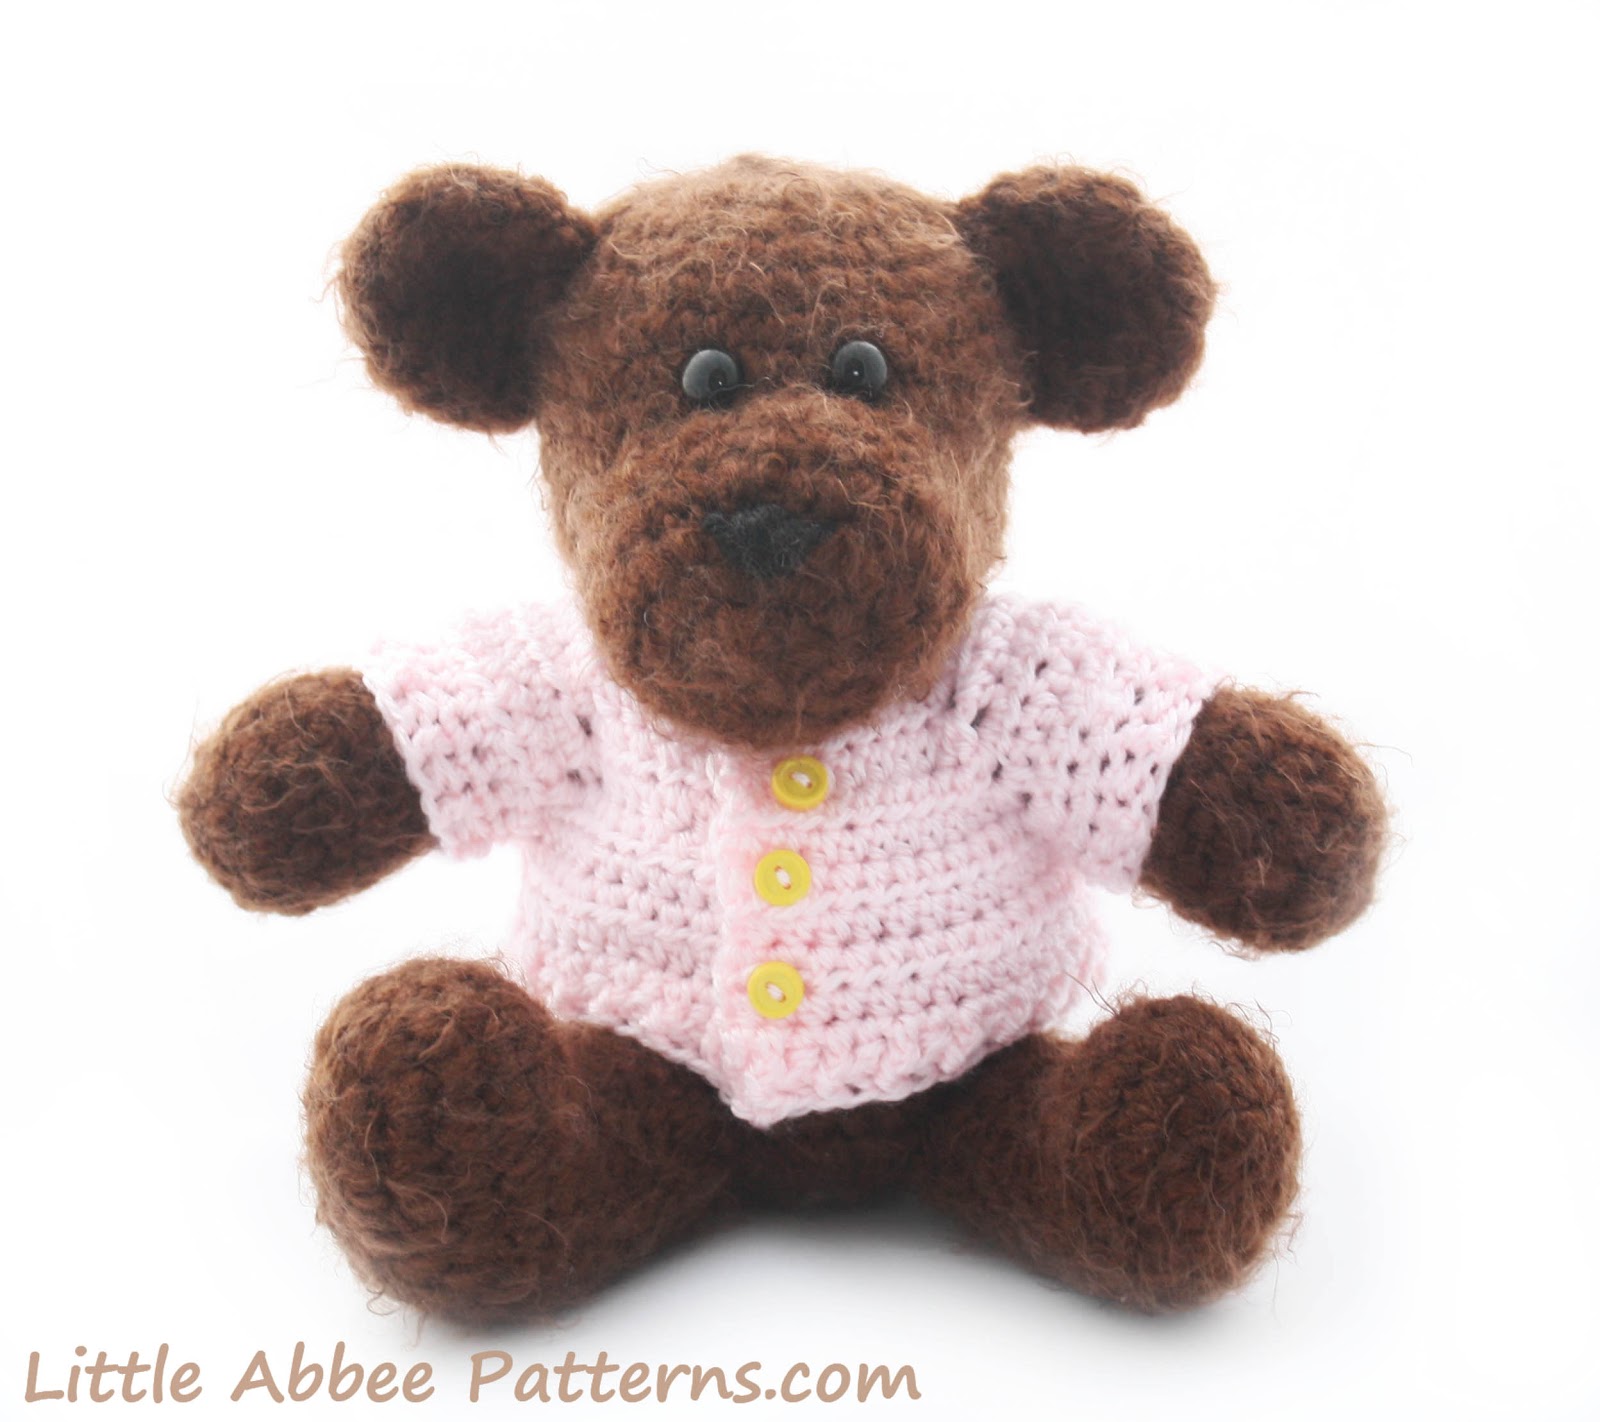 Online How to Crochet a Sweater for a Stuffed Animal Course